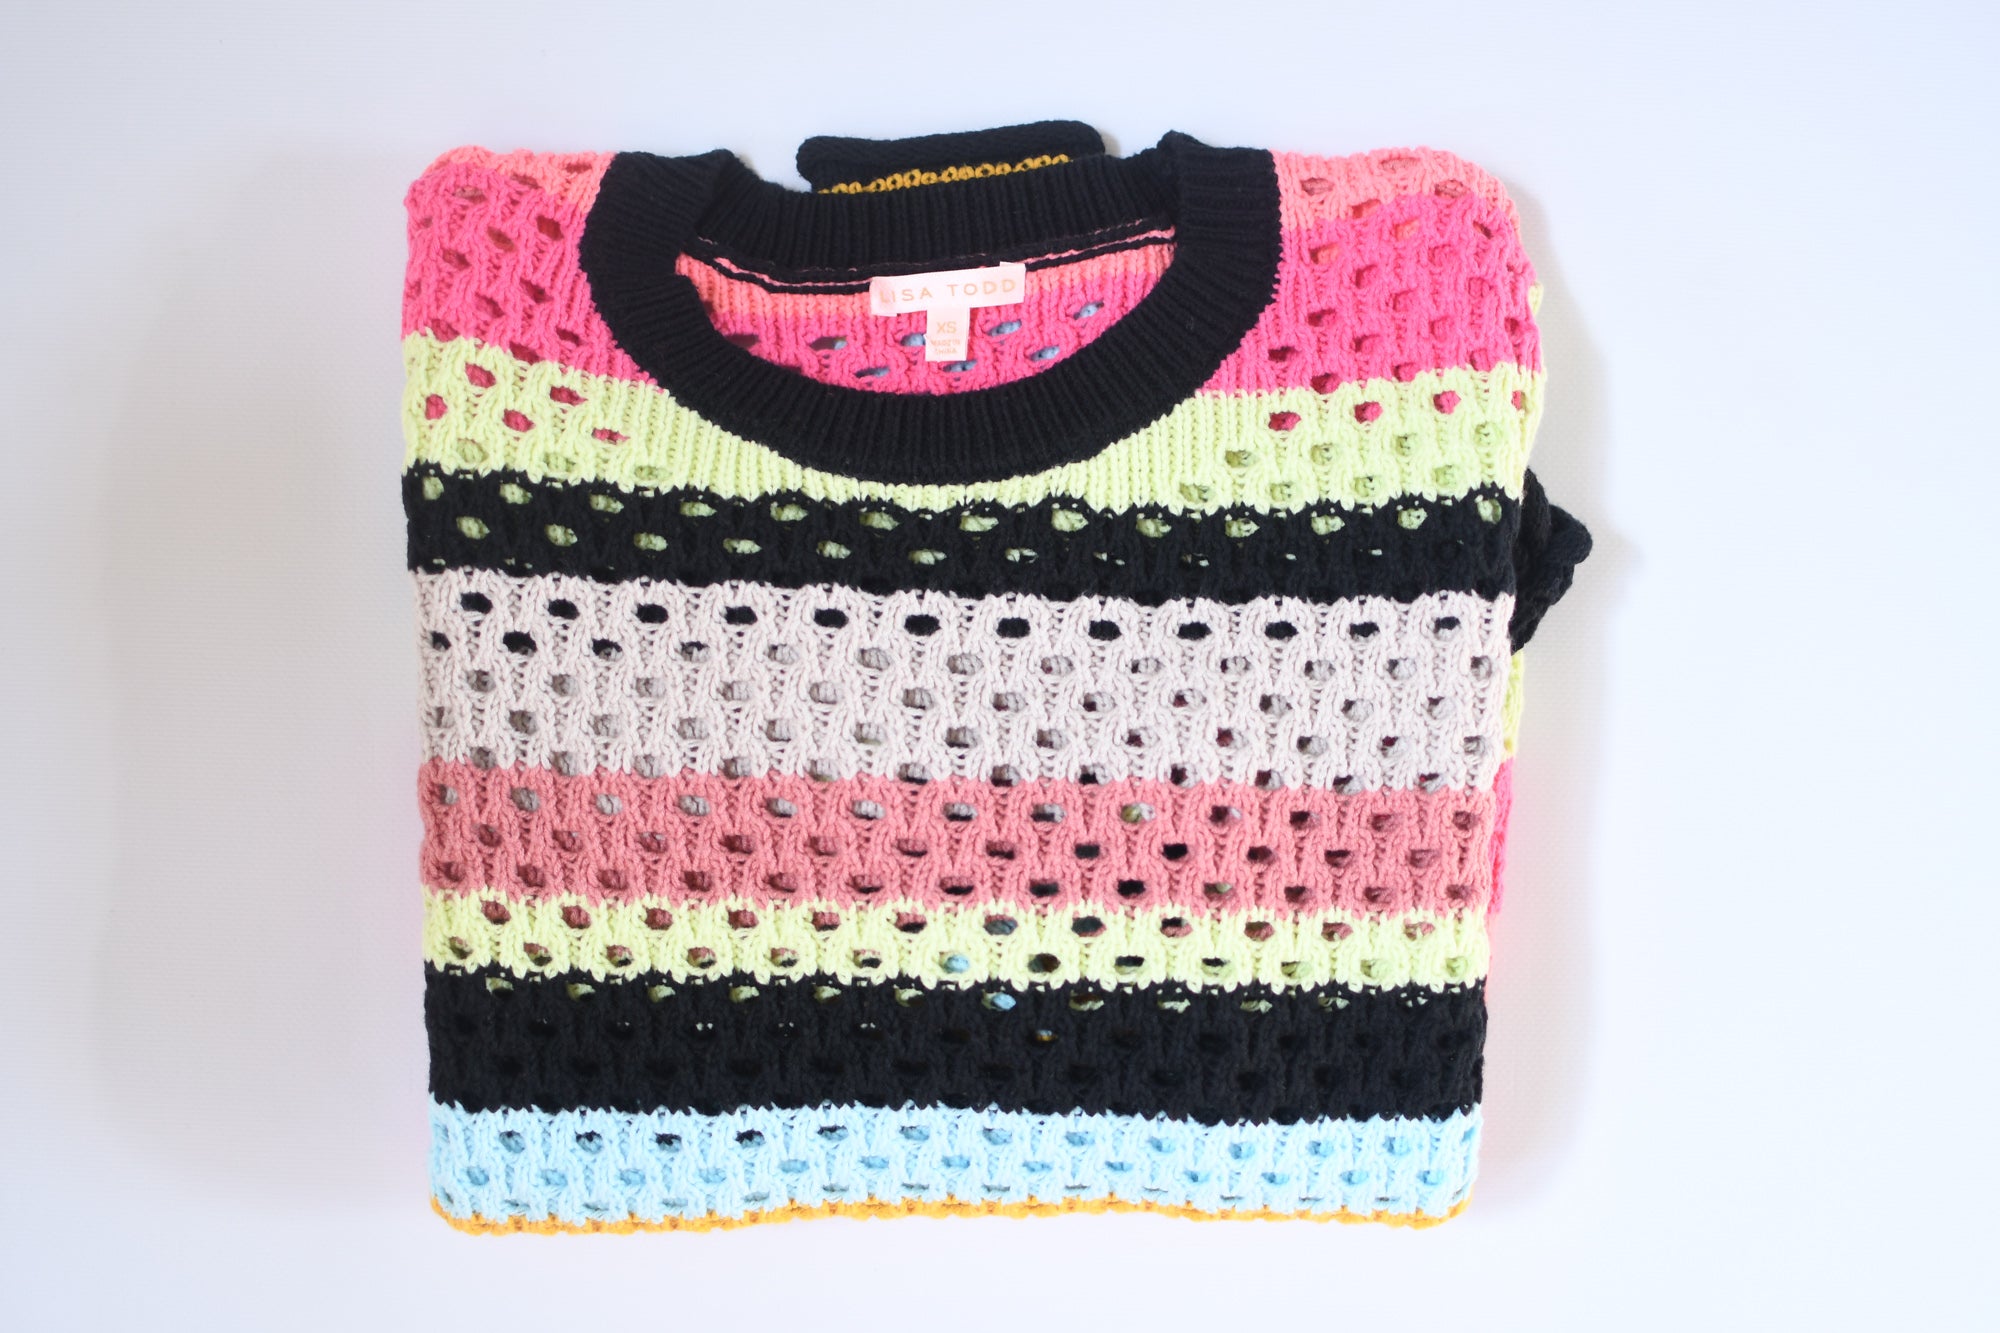 LISA TODD HYPER STRIPE OUT SWEATER